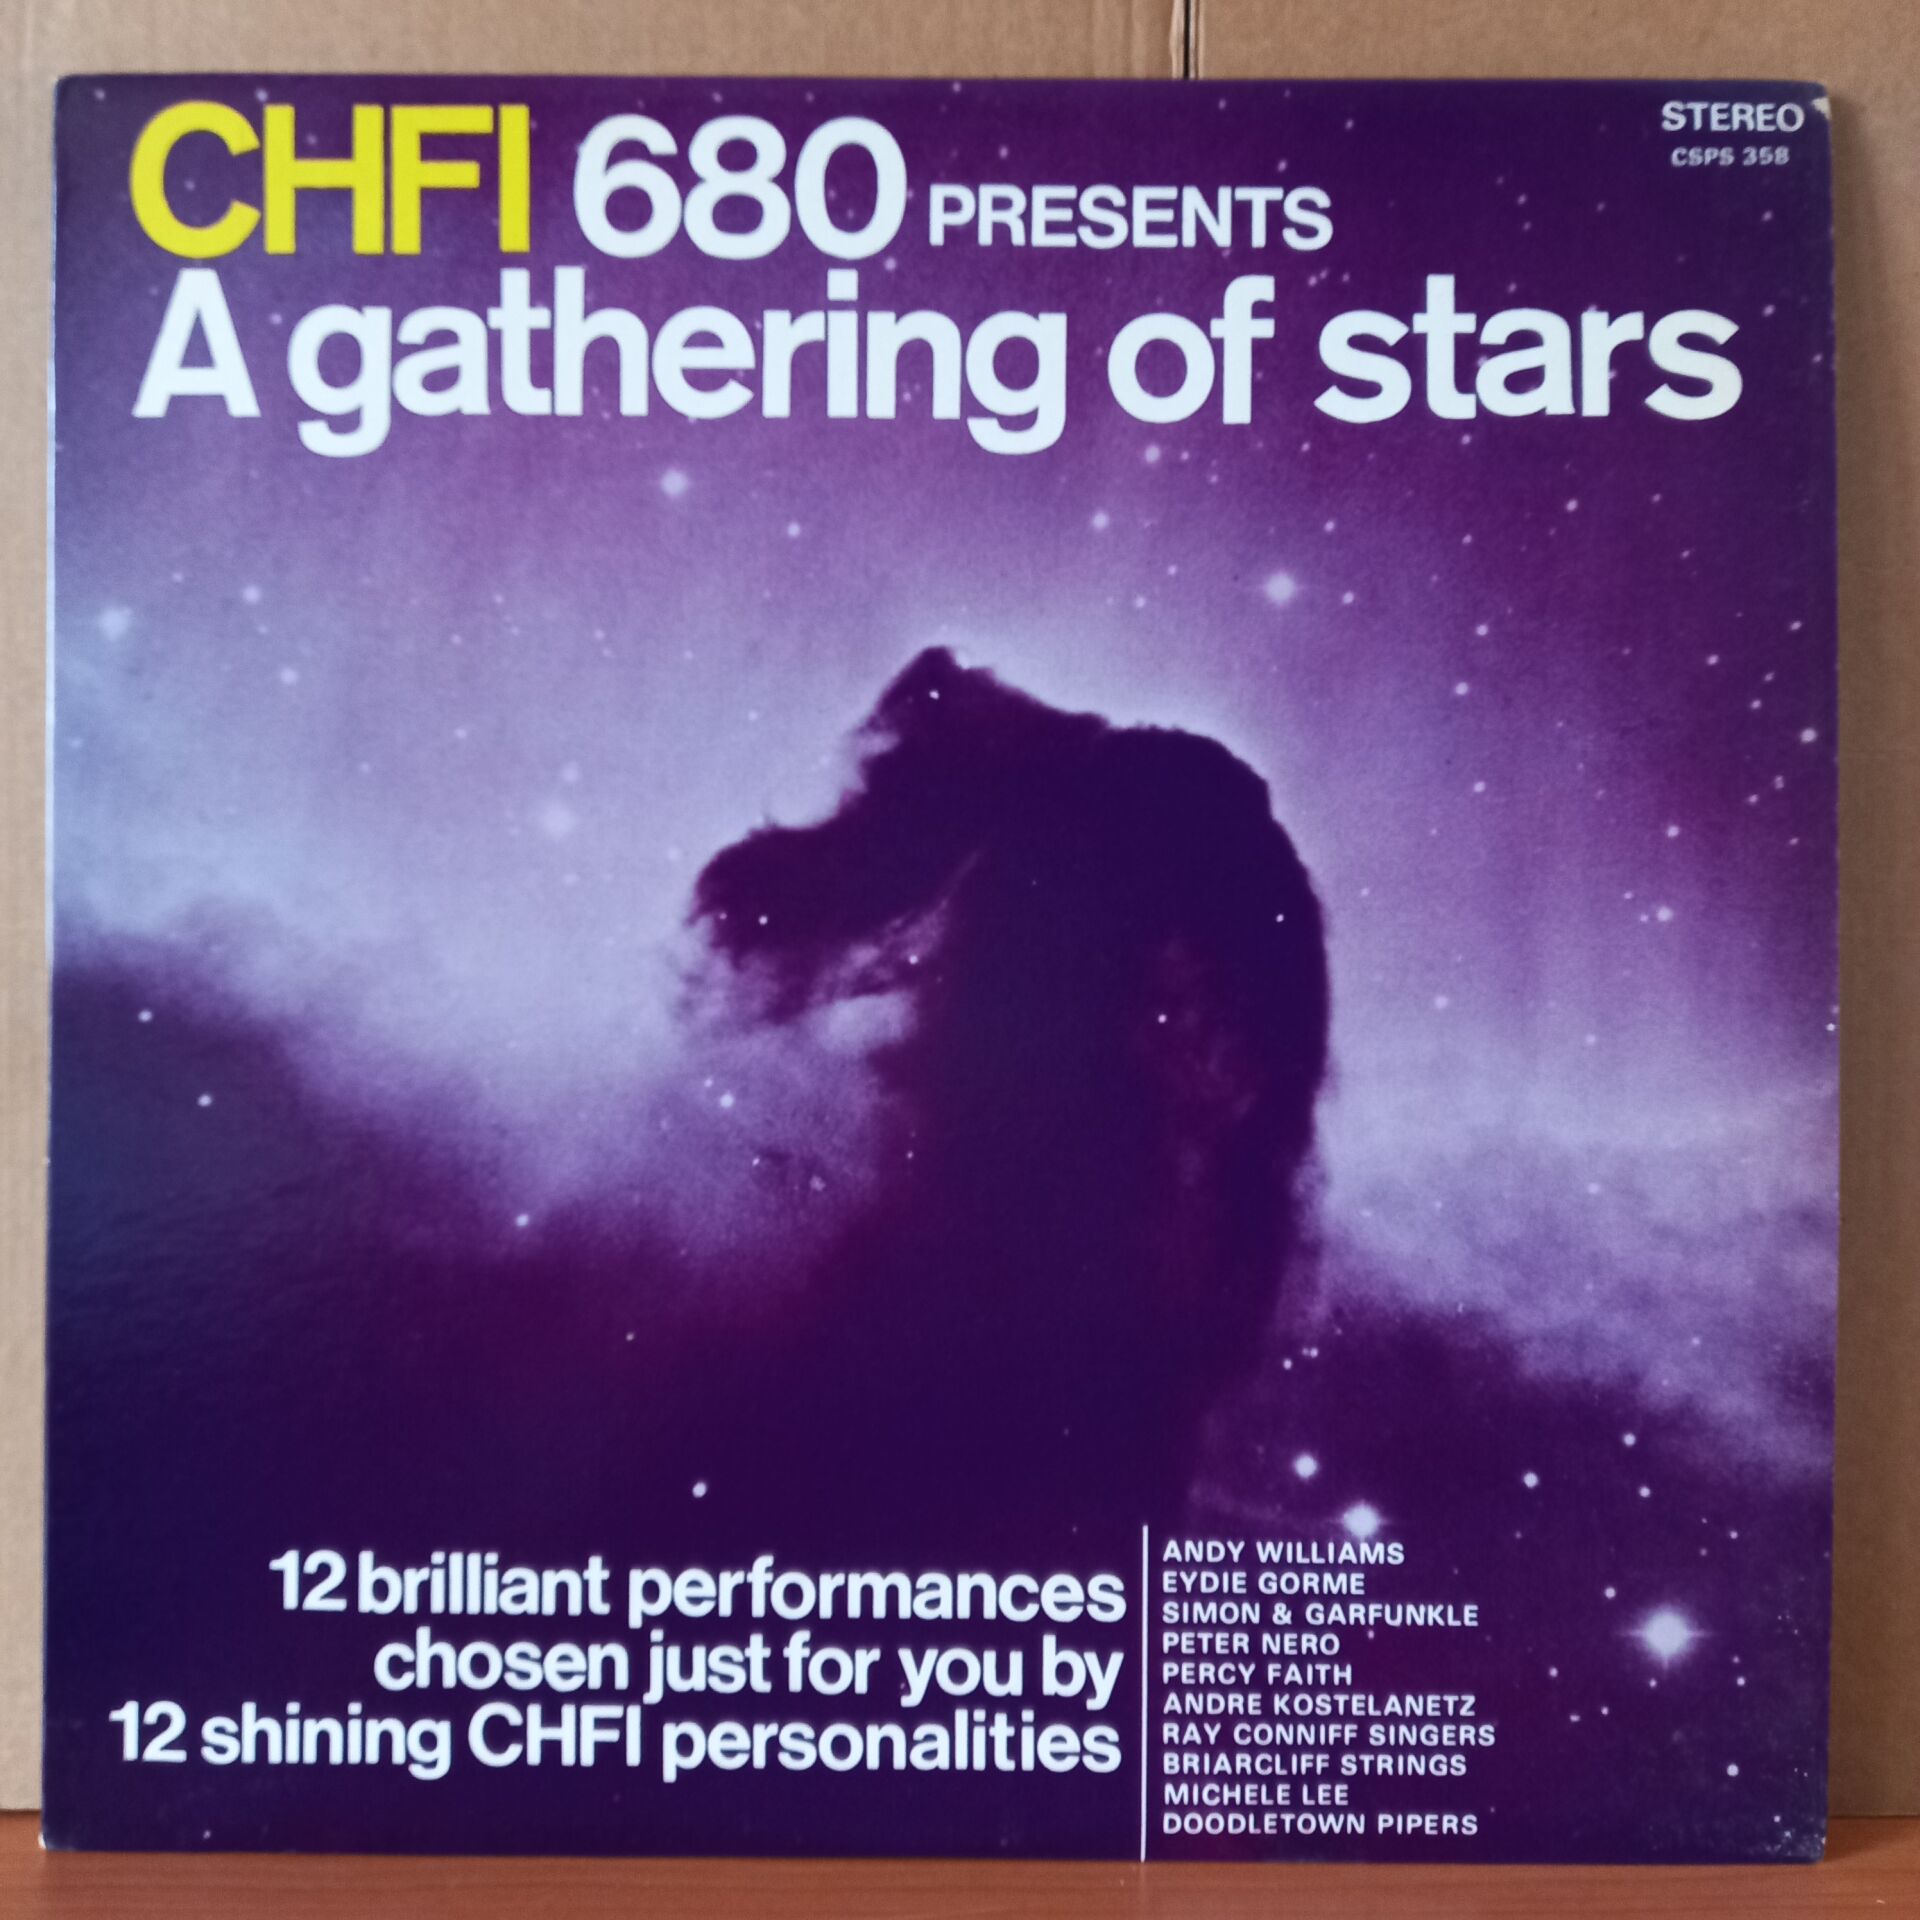 CHFI 680 PRESENTS A GATHERING OF STARS / ANDY WILLIAMS, EYDIE GORME, PERCY FAITH, MICHELE LEE, DOODLETOWN PIPERS - LP 2.EL PLAK